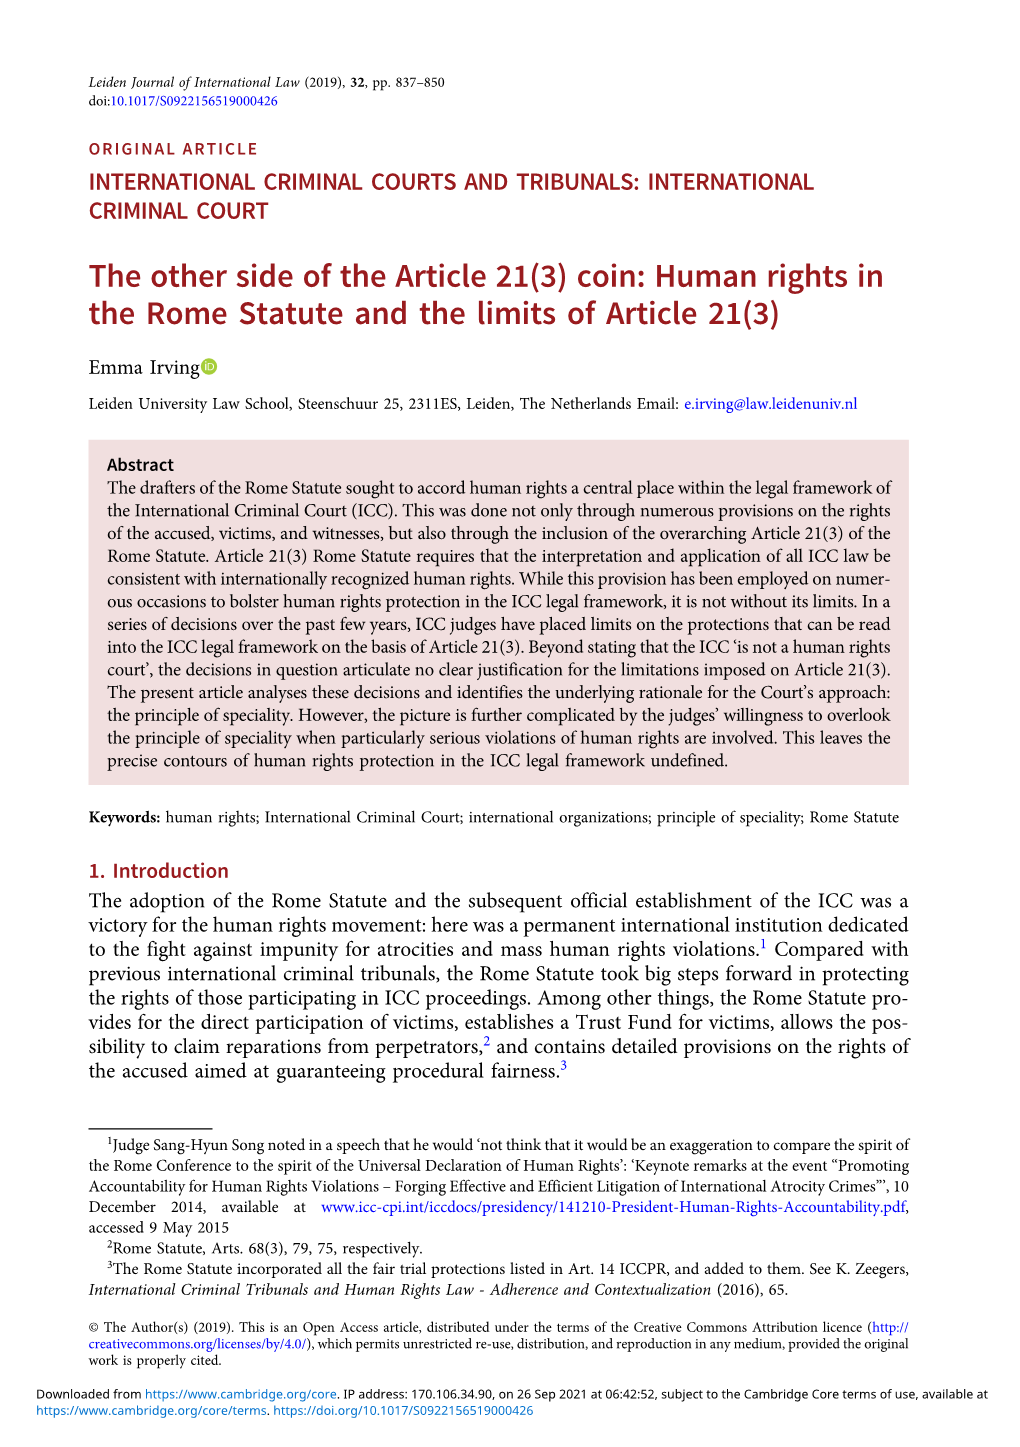 Human Rights in the Rome Statute and the Limits of Article 21(3)